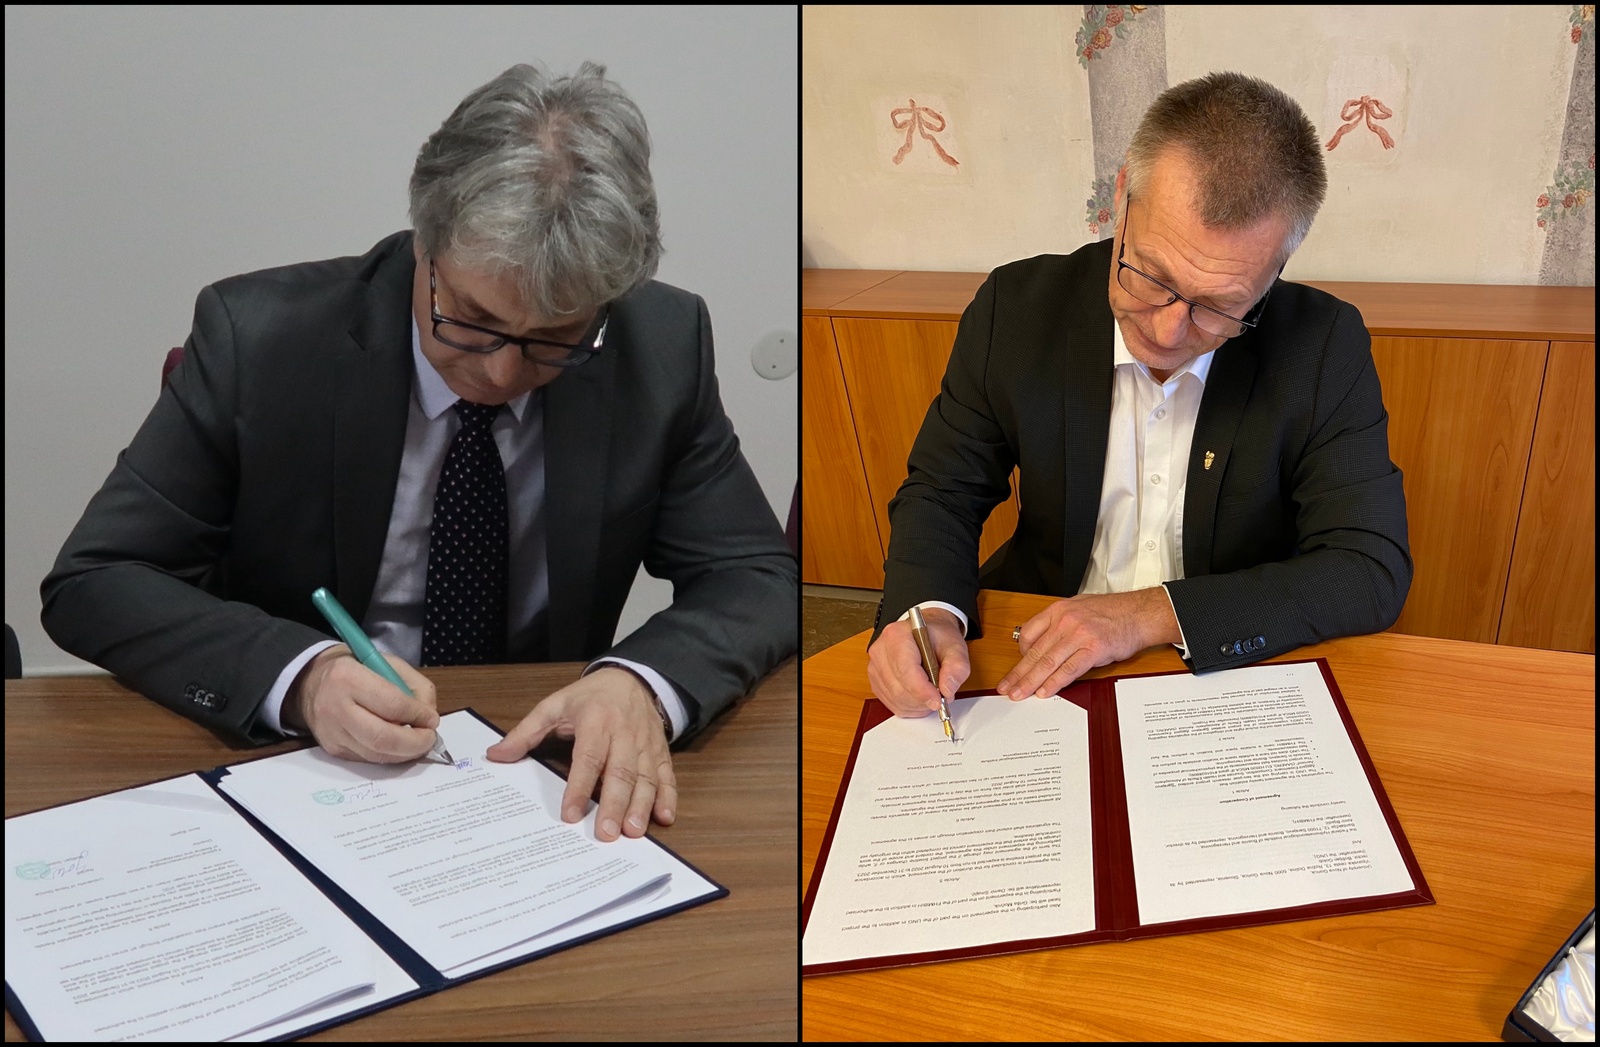 Director of the Federal Hydro-Meteorological Institute of Bosnia and Herzegovina Almir Bijedić (left) and rector of the University of Nova Gorica Prof. Dr. Boštjan Golob (right).